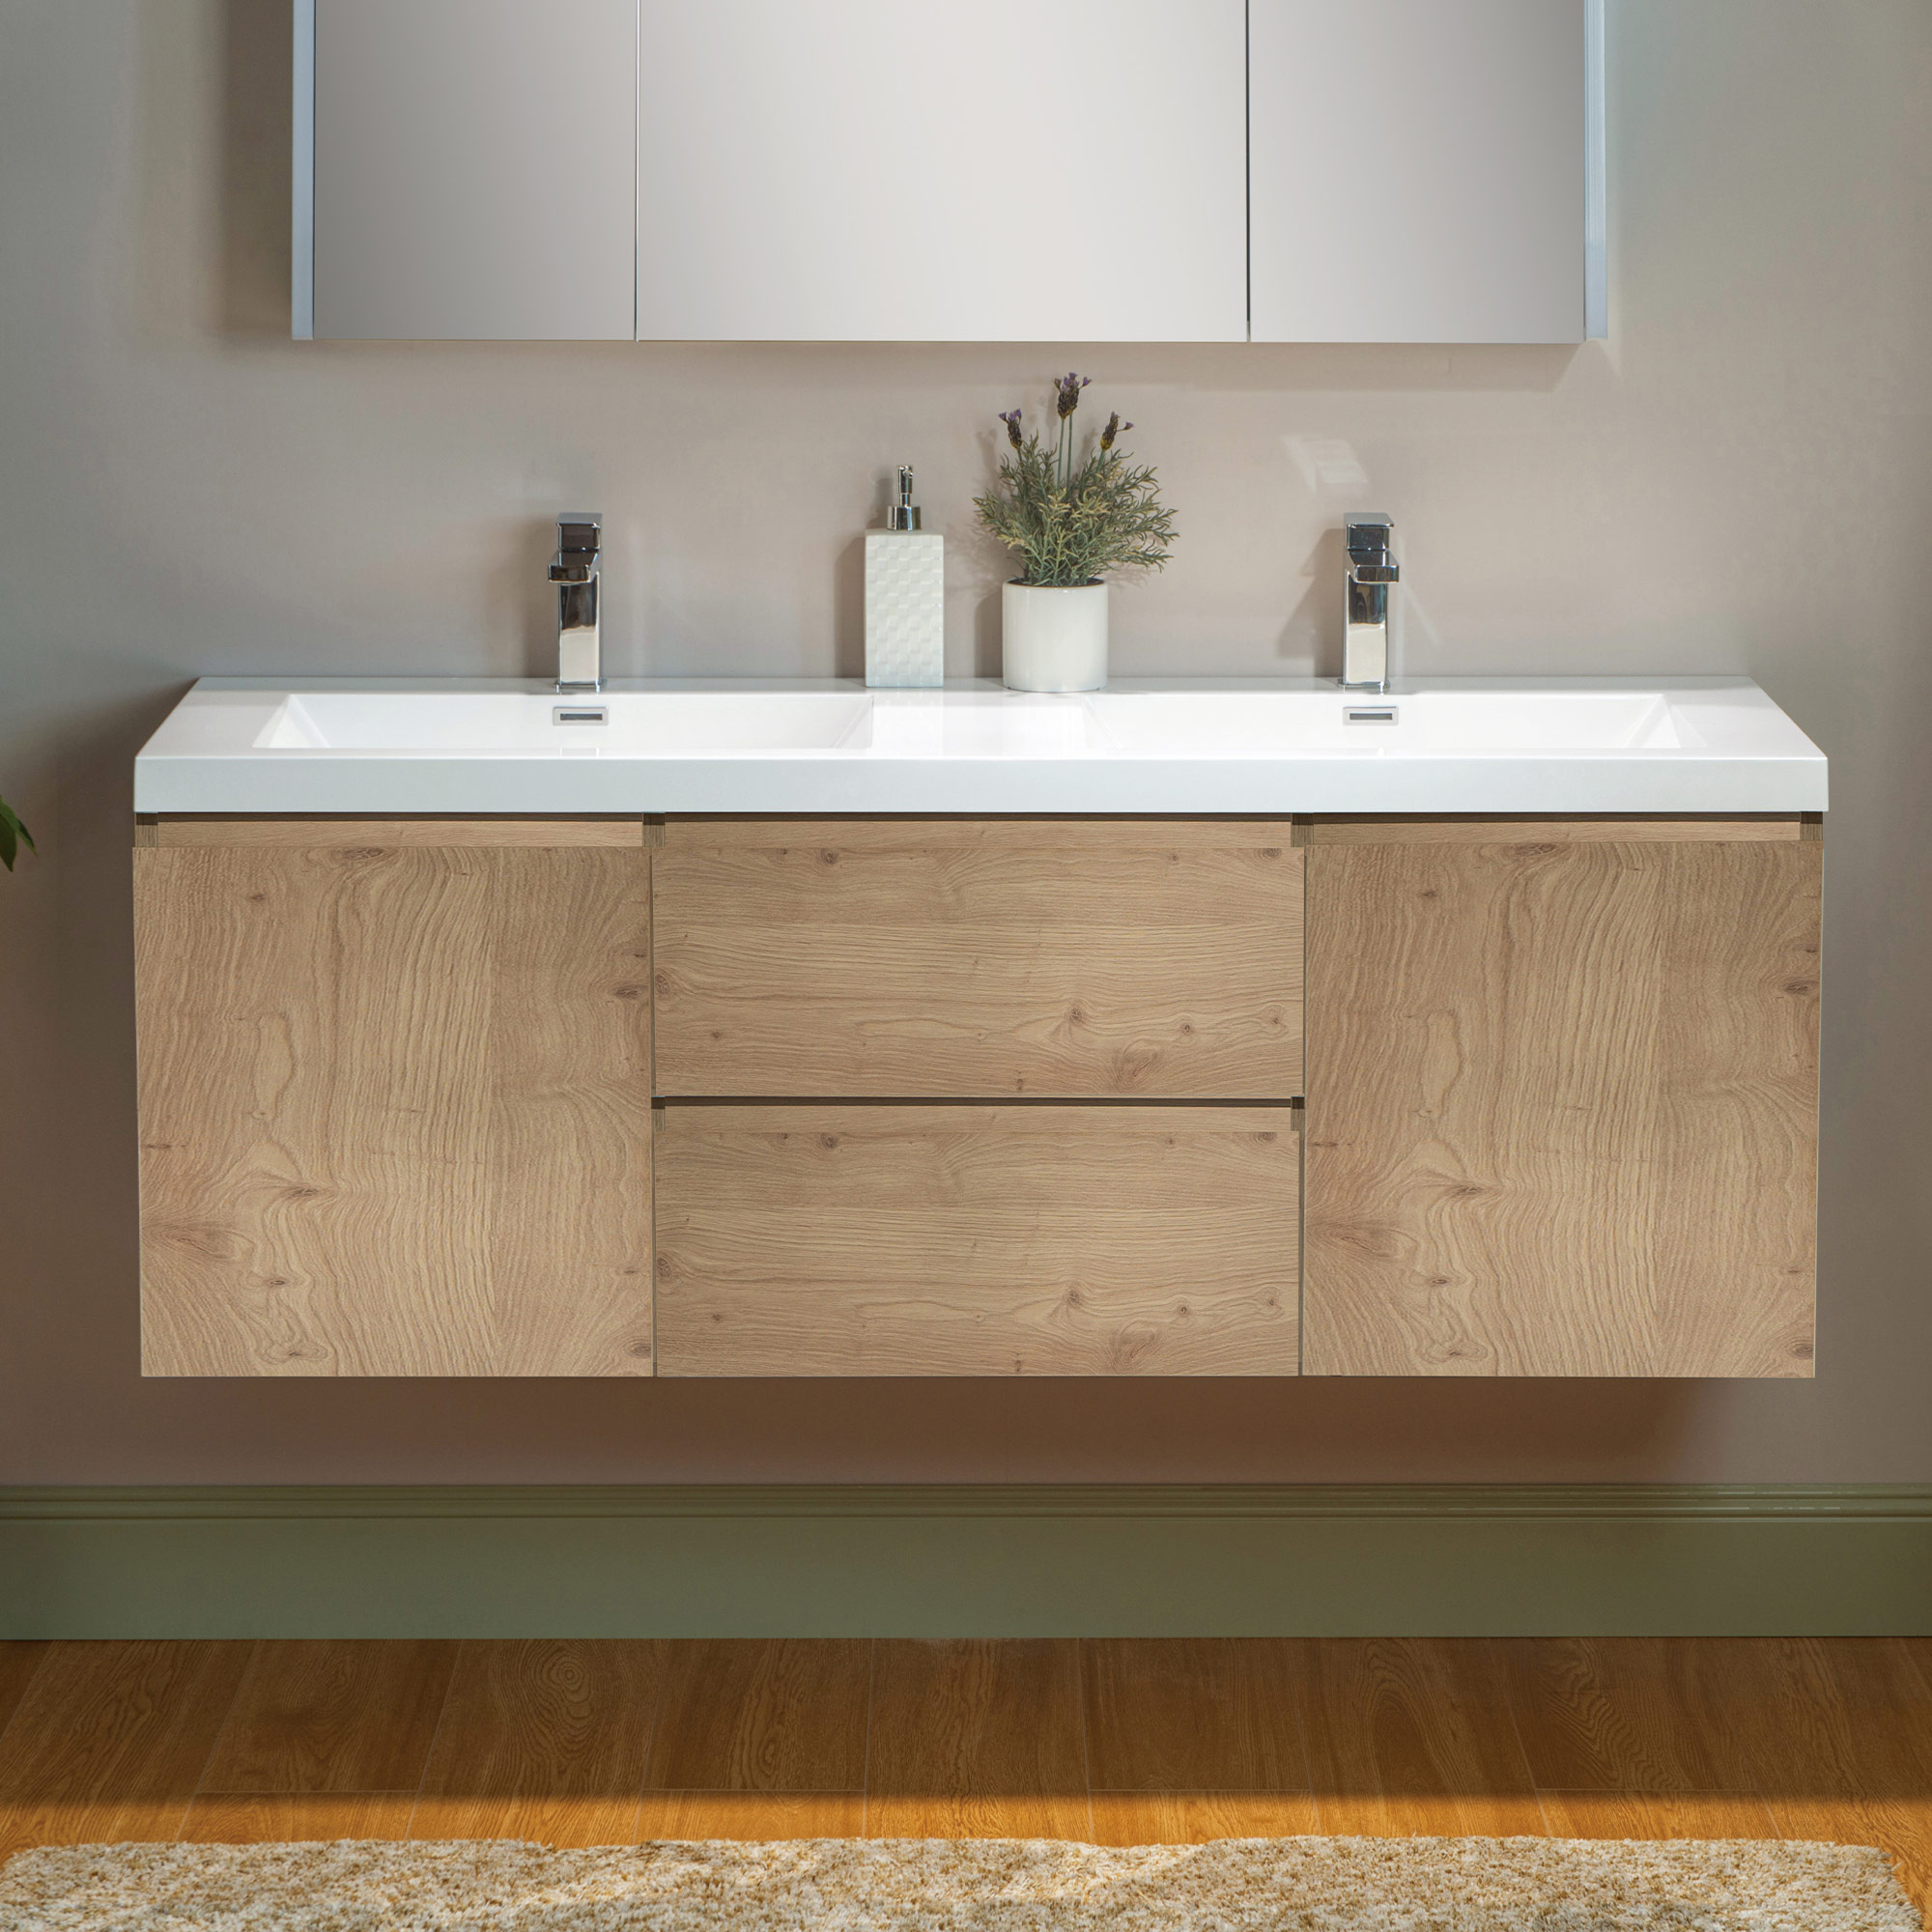 WOODBRIDGE 59 in. W x 19 in. D Wall Mounted Floating Vanity in Nature Oak with Resin Composite Vanity Top in Glossy White